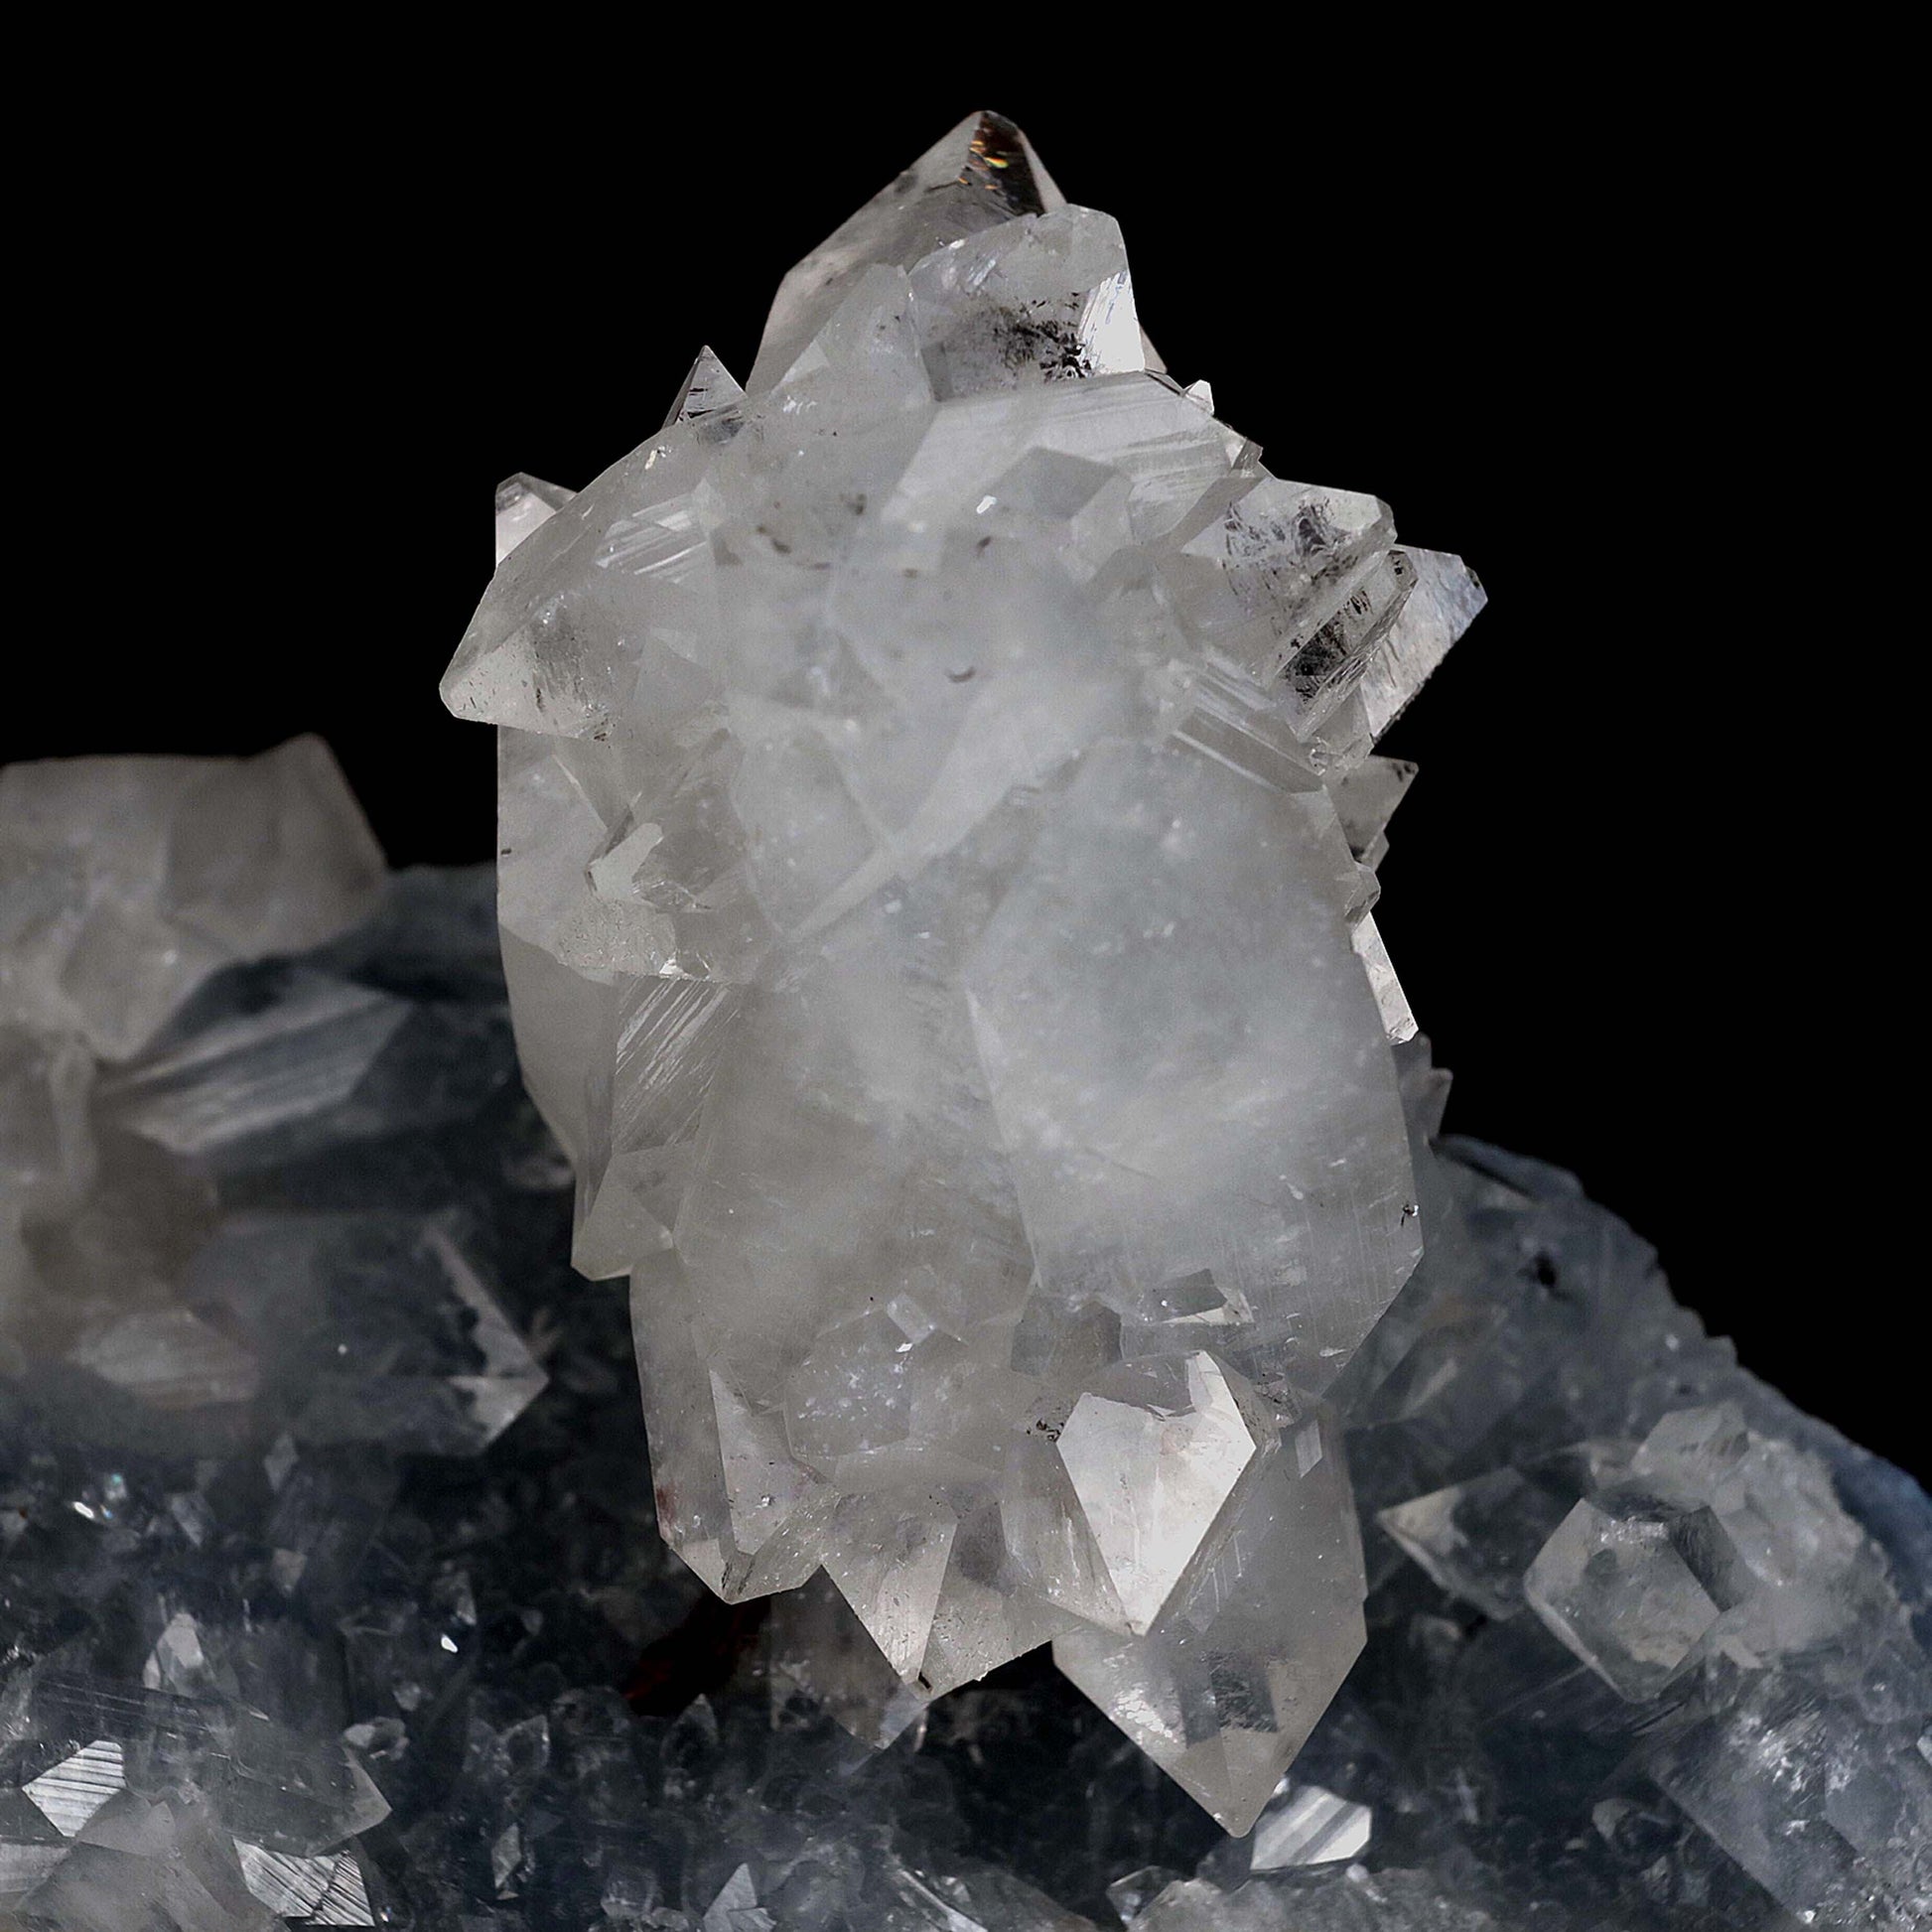 Clear Apophyllite Pointed Crystal on Heulandite Natural Mineral Specim…  https://www.superbminerals.us/products/clear-apophyllite-pointed-crystal-on-heulandite-natural-mineral-specimen-b-4658  Features: A classic group of very sharp, glassy, GEM / gemmy, colorless, tetragonal prisms of Apophyllite which are growing on a dark blue-grey colored stalactite of Heulandite and associated with a "pointed"-shaped crystal group of heulandite aesthetically flaring out of the lower portion of the piece.